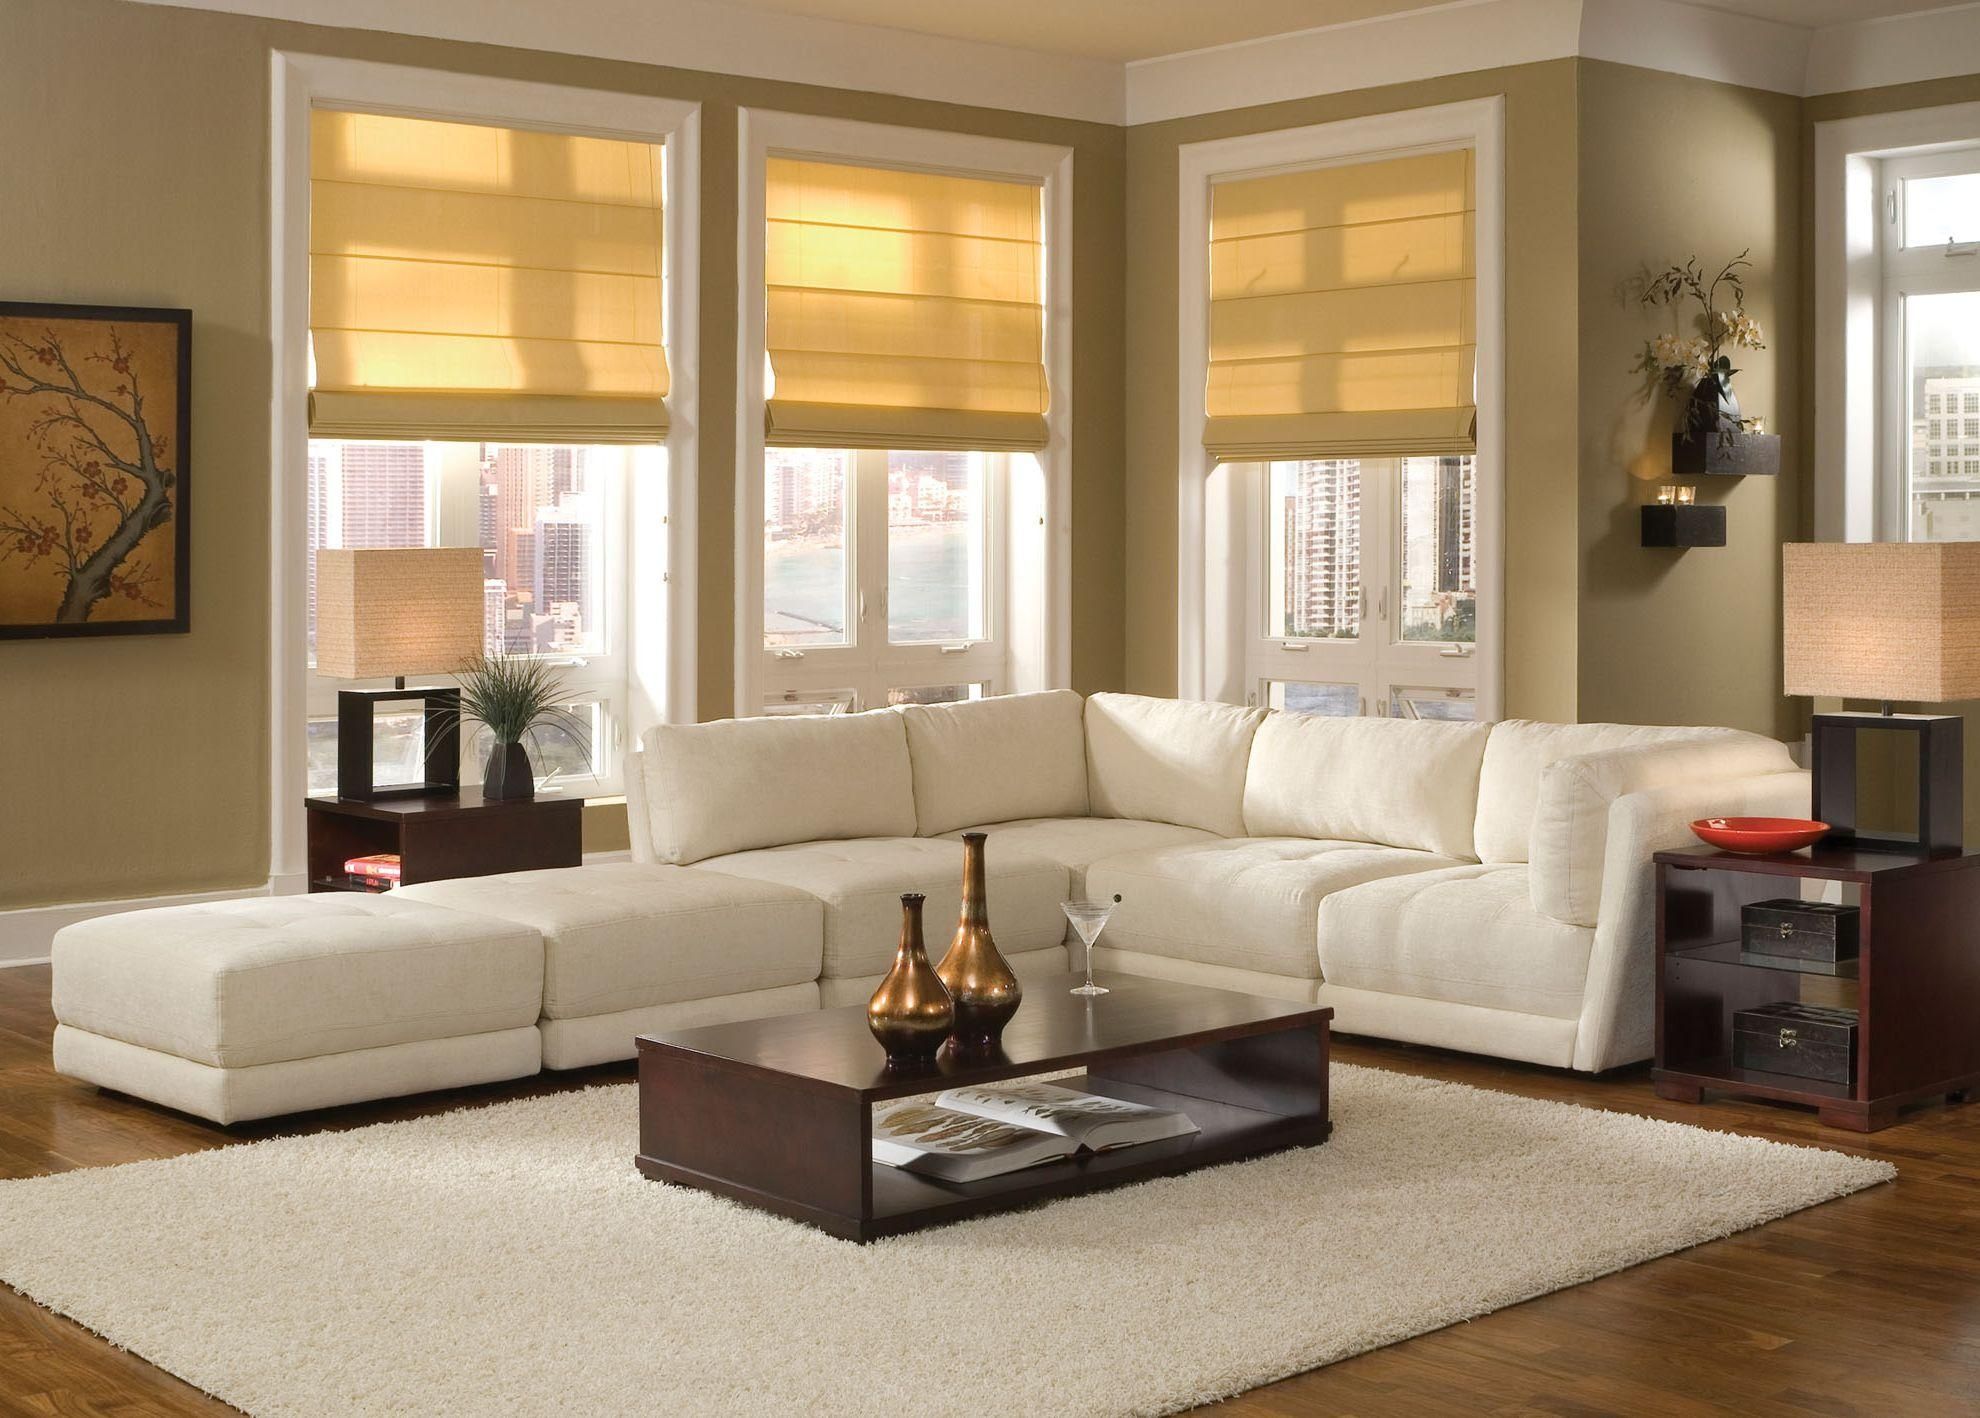 Marvelous Creativity Sectional Sofa Small Living Room Design In Decorating With A Sectional Sofa (View 6 of 15)